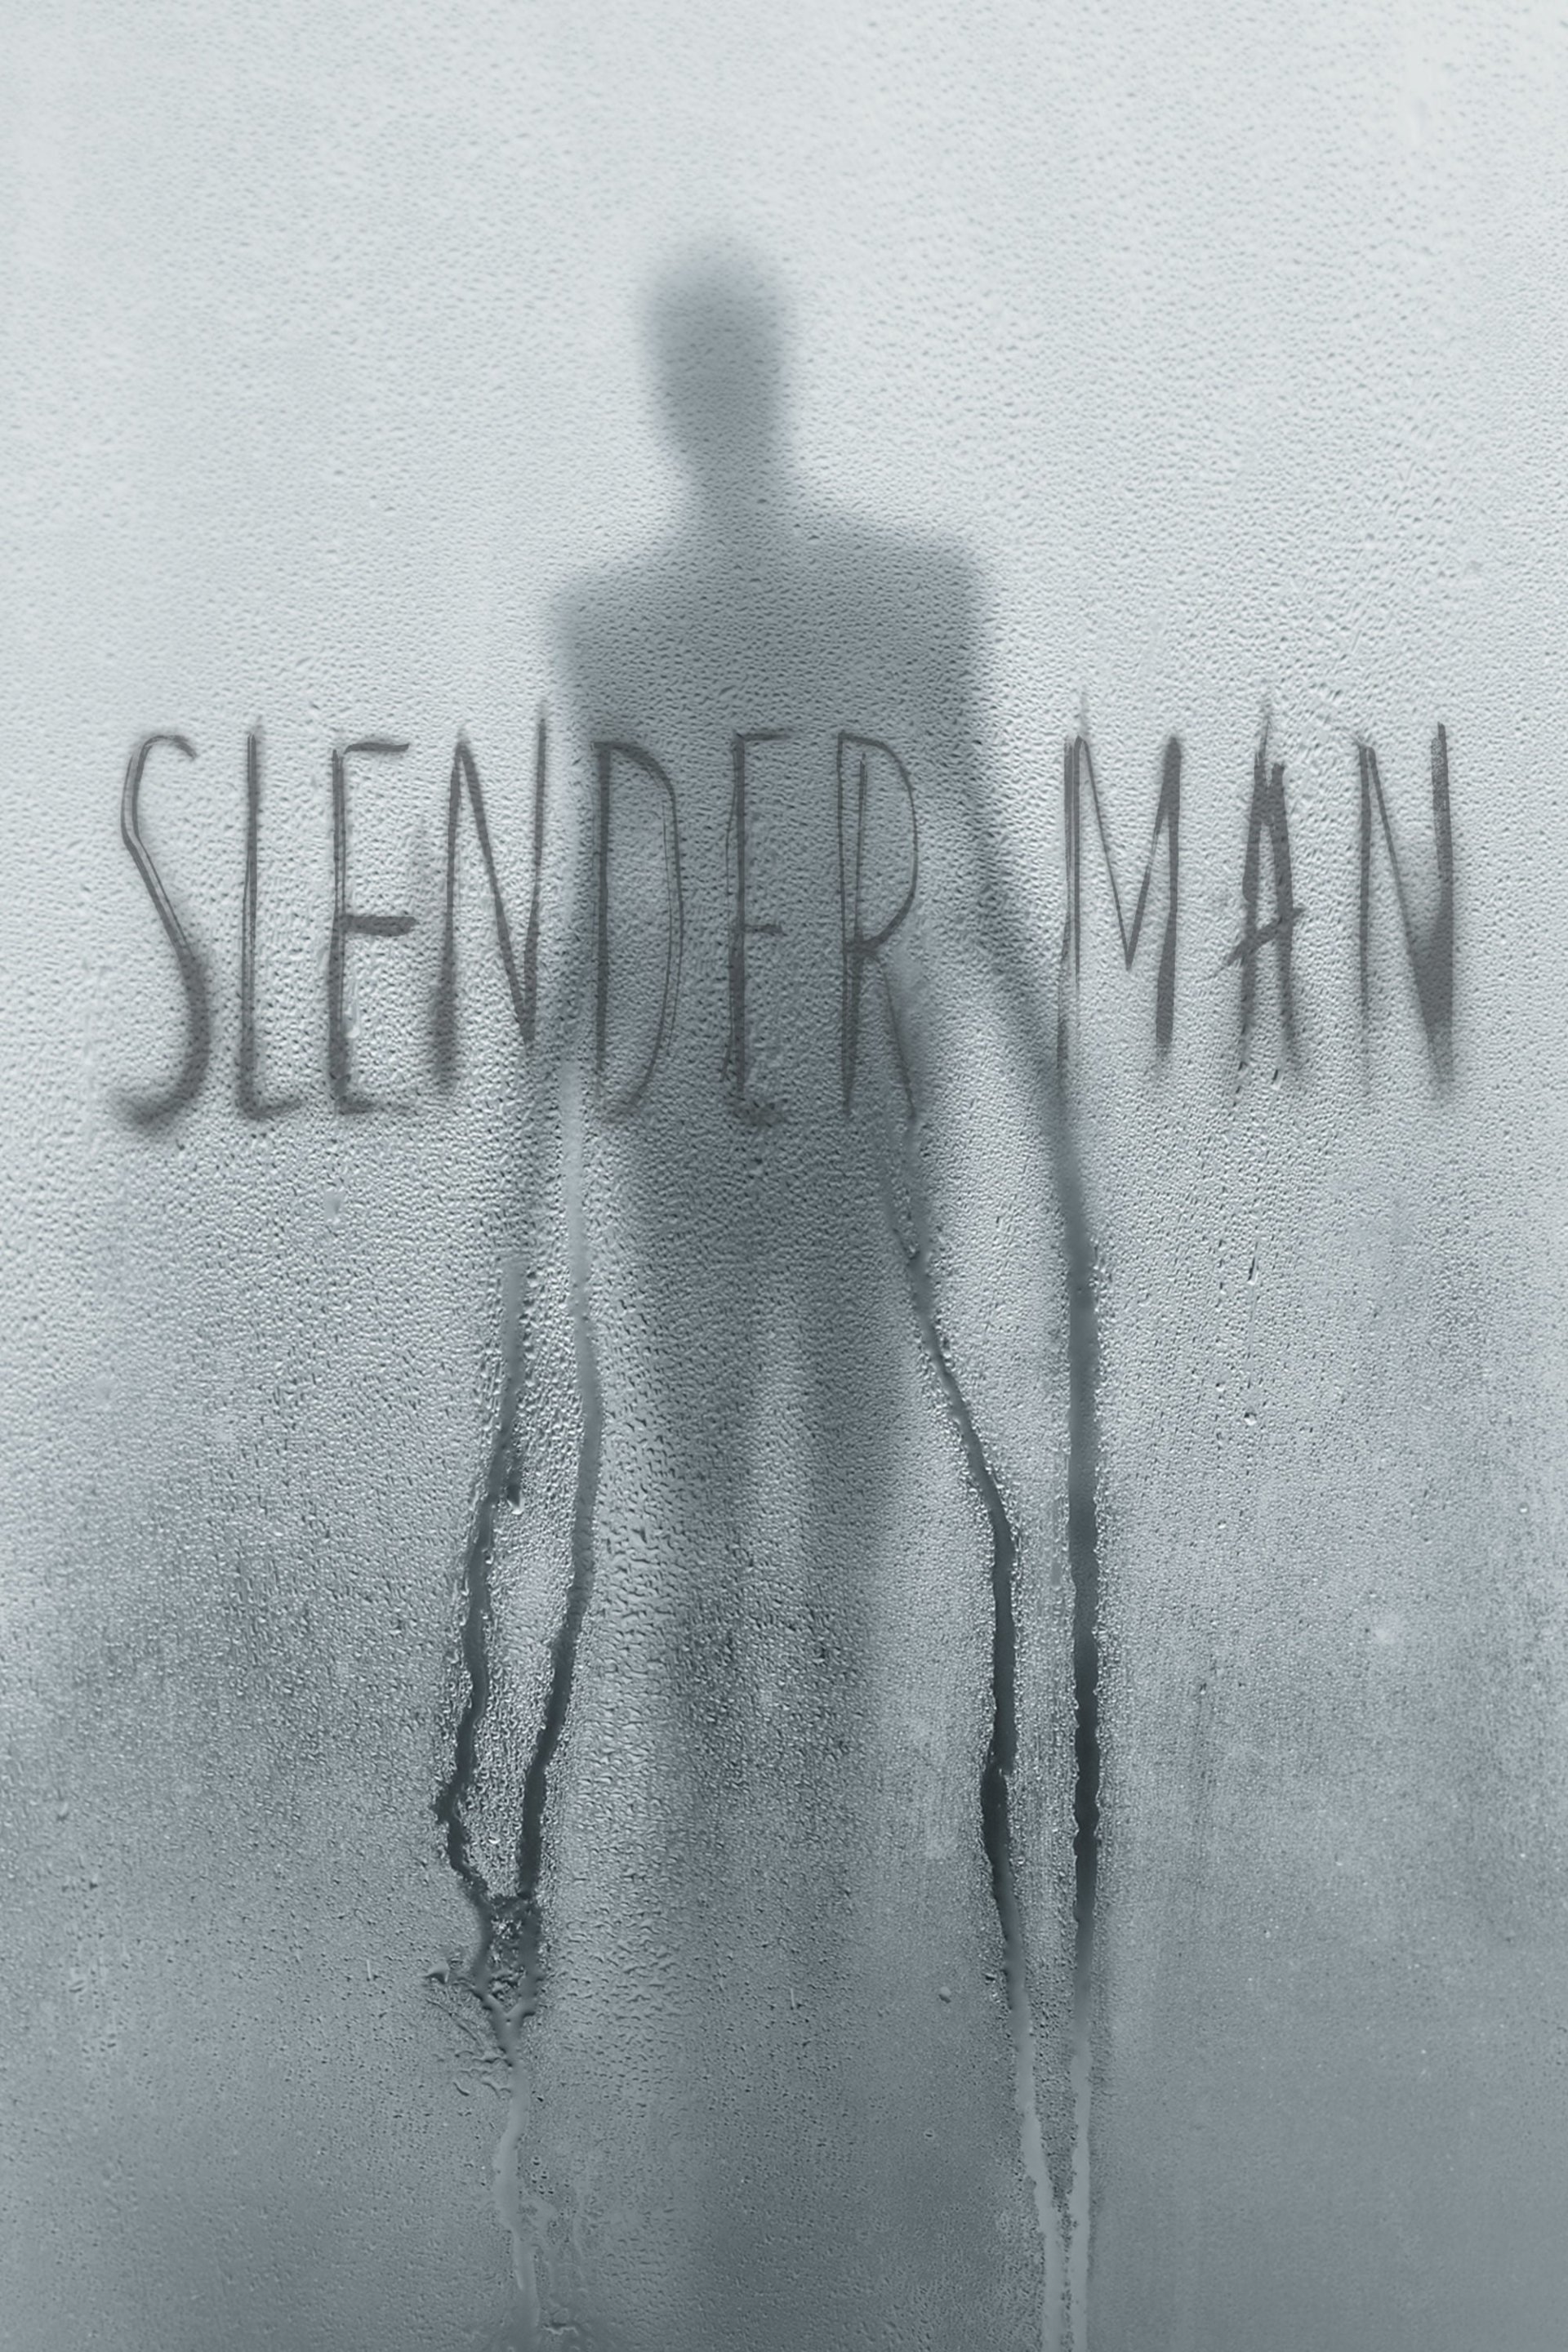 Slender Man Movie Poster ID 204917 Image Abyss